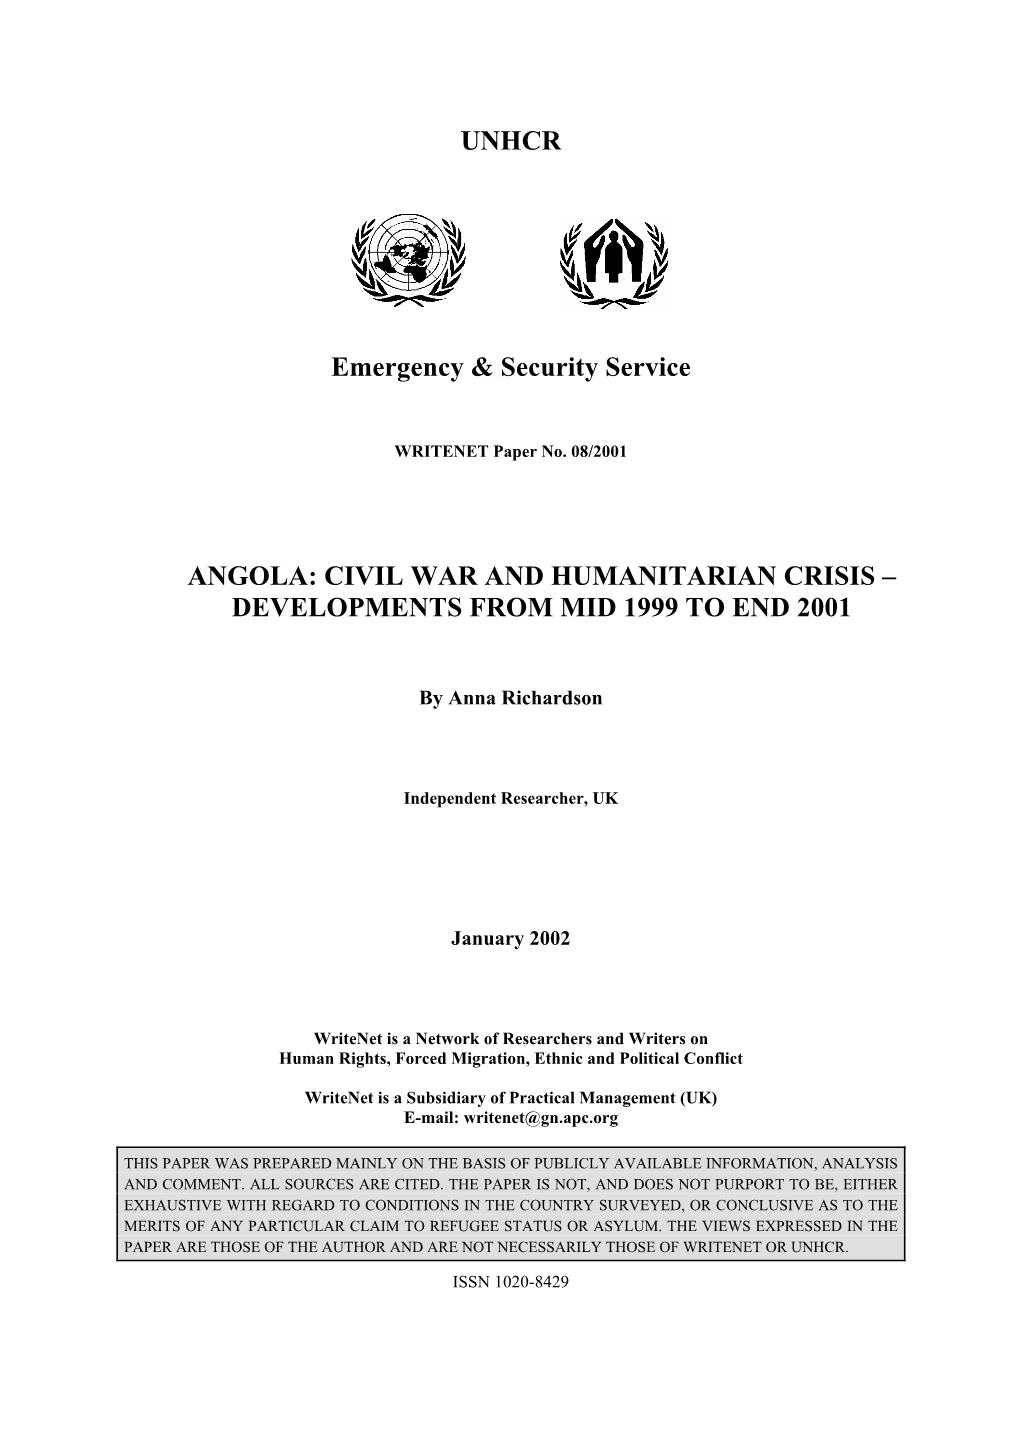 Angola: Civil War and Humanitarian Crisis – Developments from Mid 1999 to End 2001